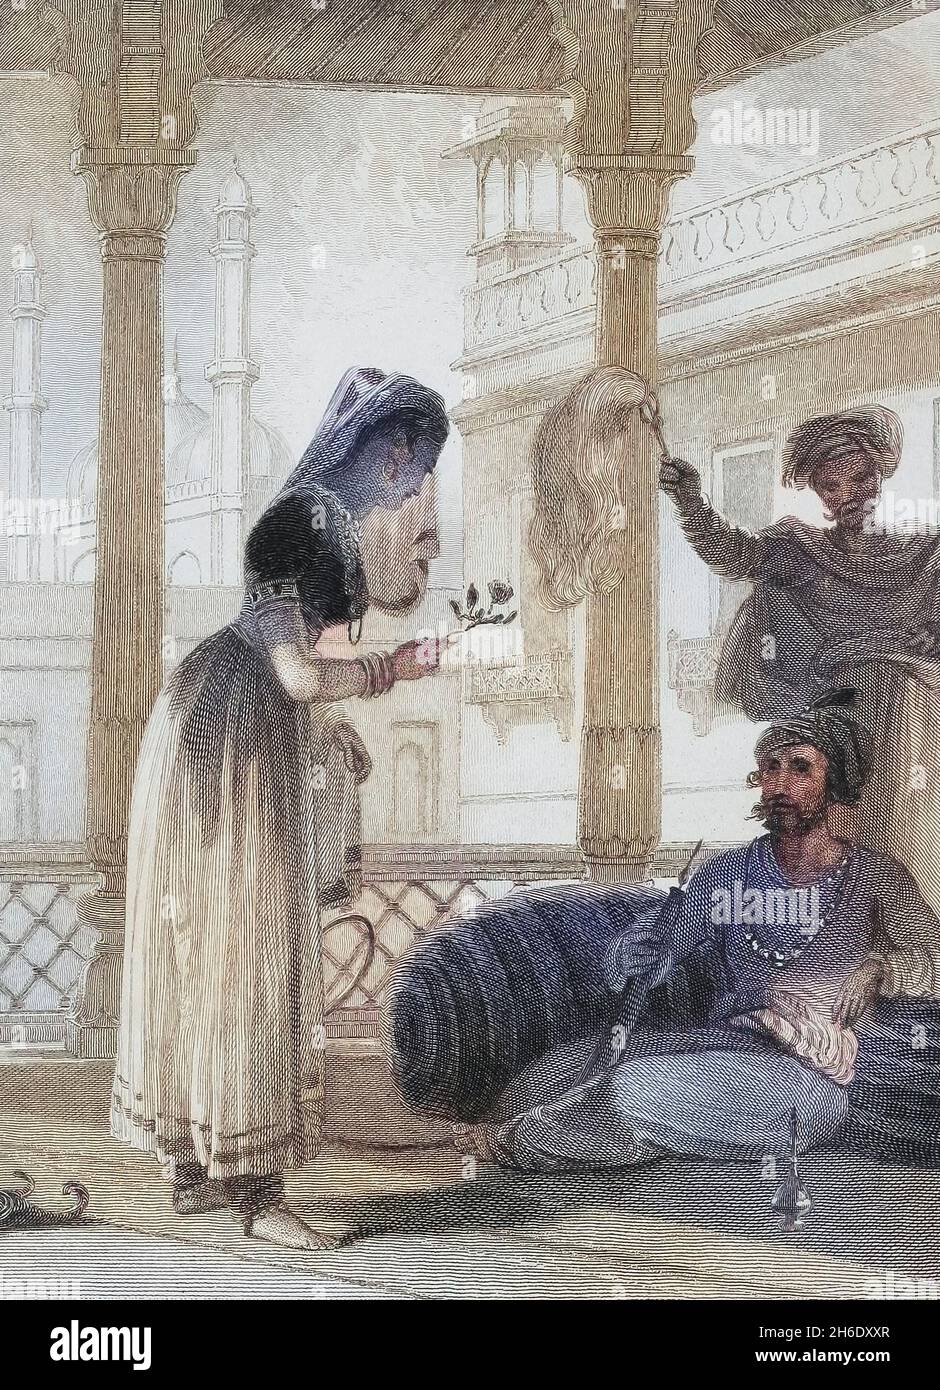 A Mohammedan Lady Presenting Her Lord A Rose From the book ' The Oriental annual, or, Scenes in India ' by the Rev. Hobart Caunter Published by Edward Bull, London 1838 engravings from drawings by William Daniell Stock Photo